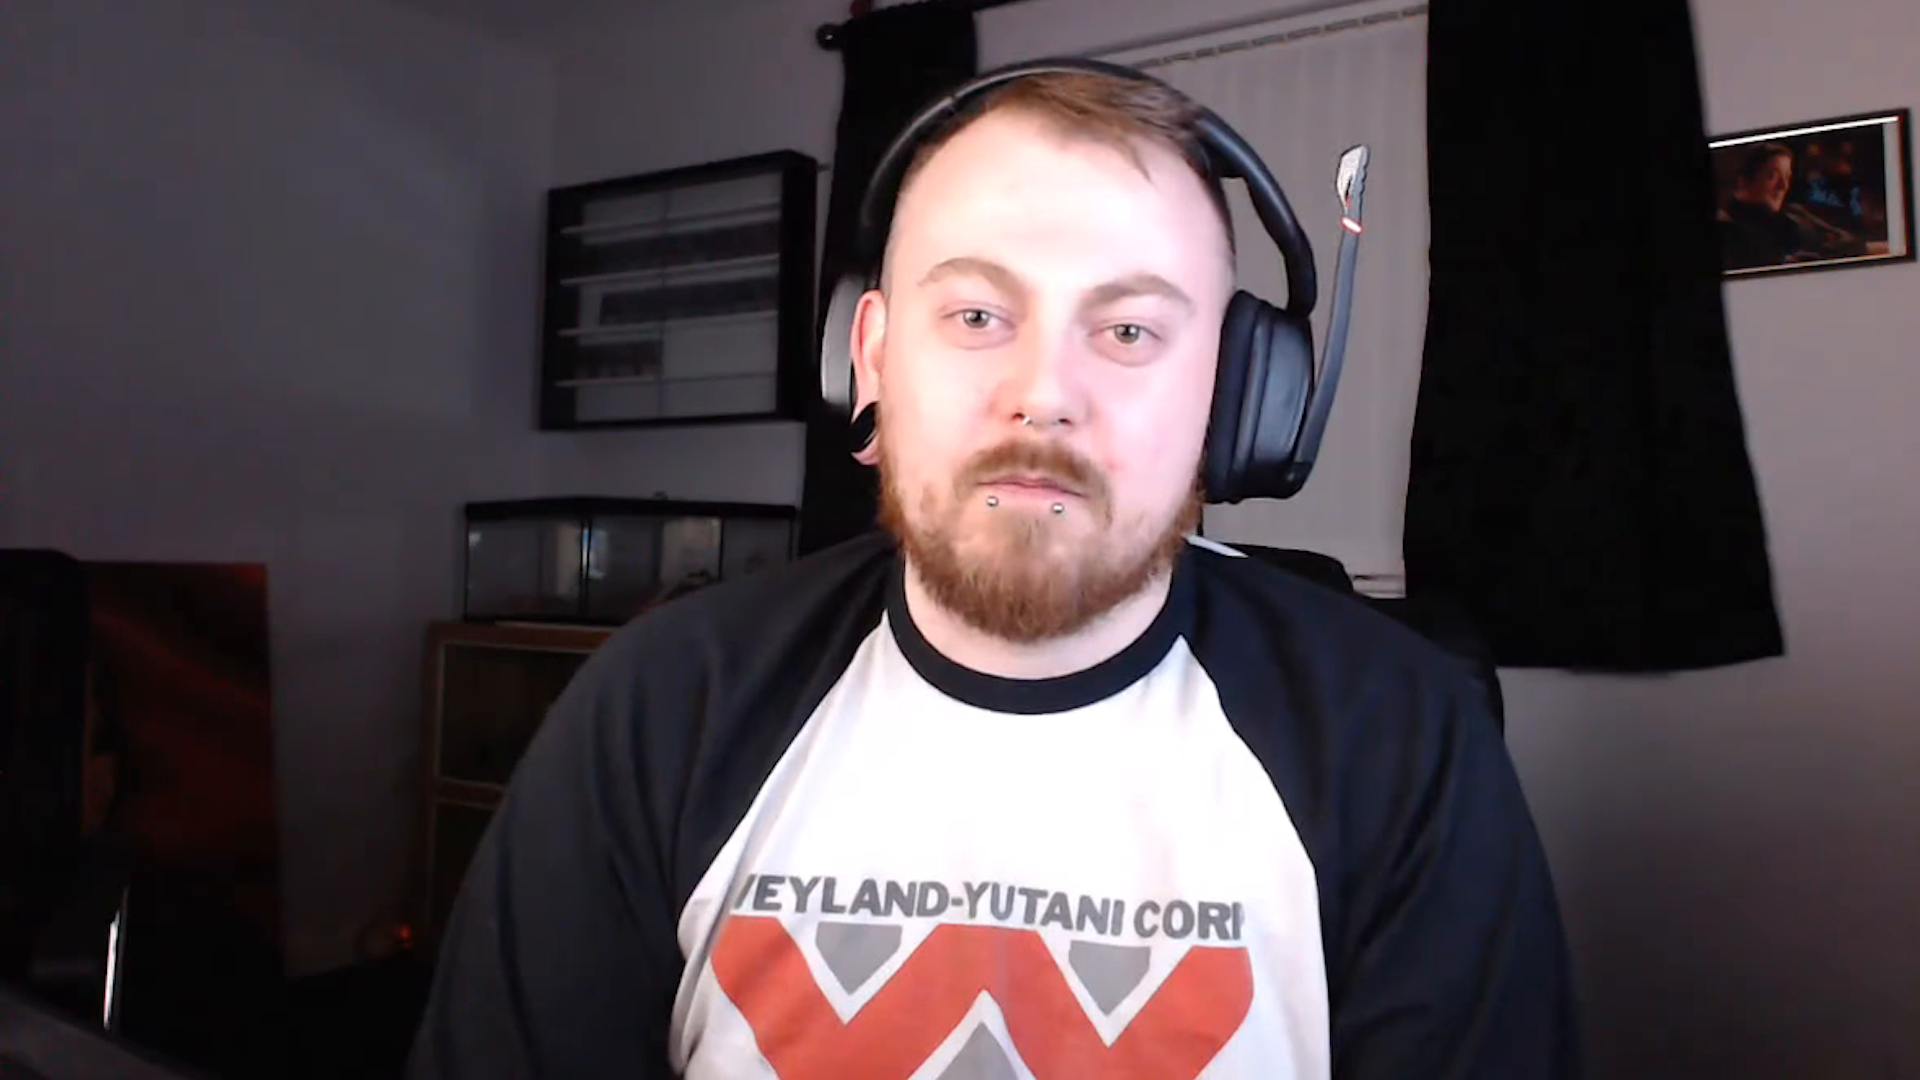 Mark Meechan, also known by the alias Count Dankula